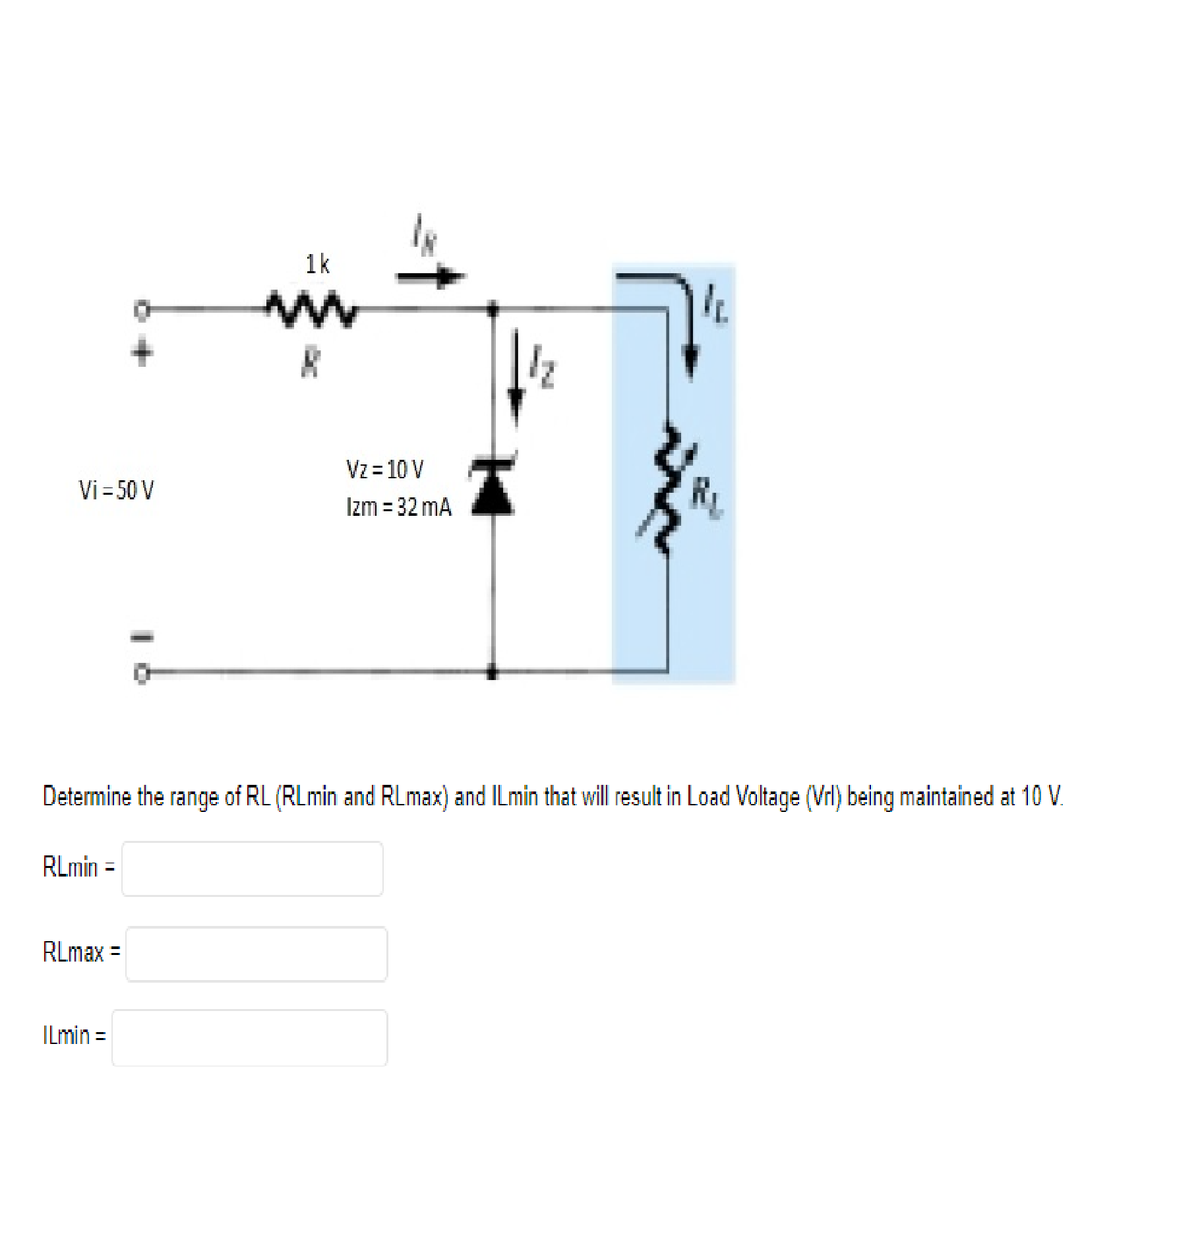 1k
ww
11.
Vi = 50 V
Vz= 10 V
Izm = 32 mA
Determine the range of RL (RLmin and RLmax) and ILmin that will result in Load Voltage (Vrl) being maintained at 10 V.
RLmin =
RLmax =
ILmin =
1₂